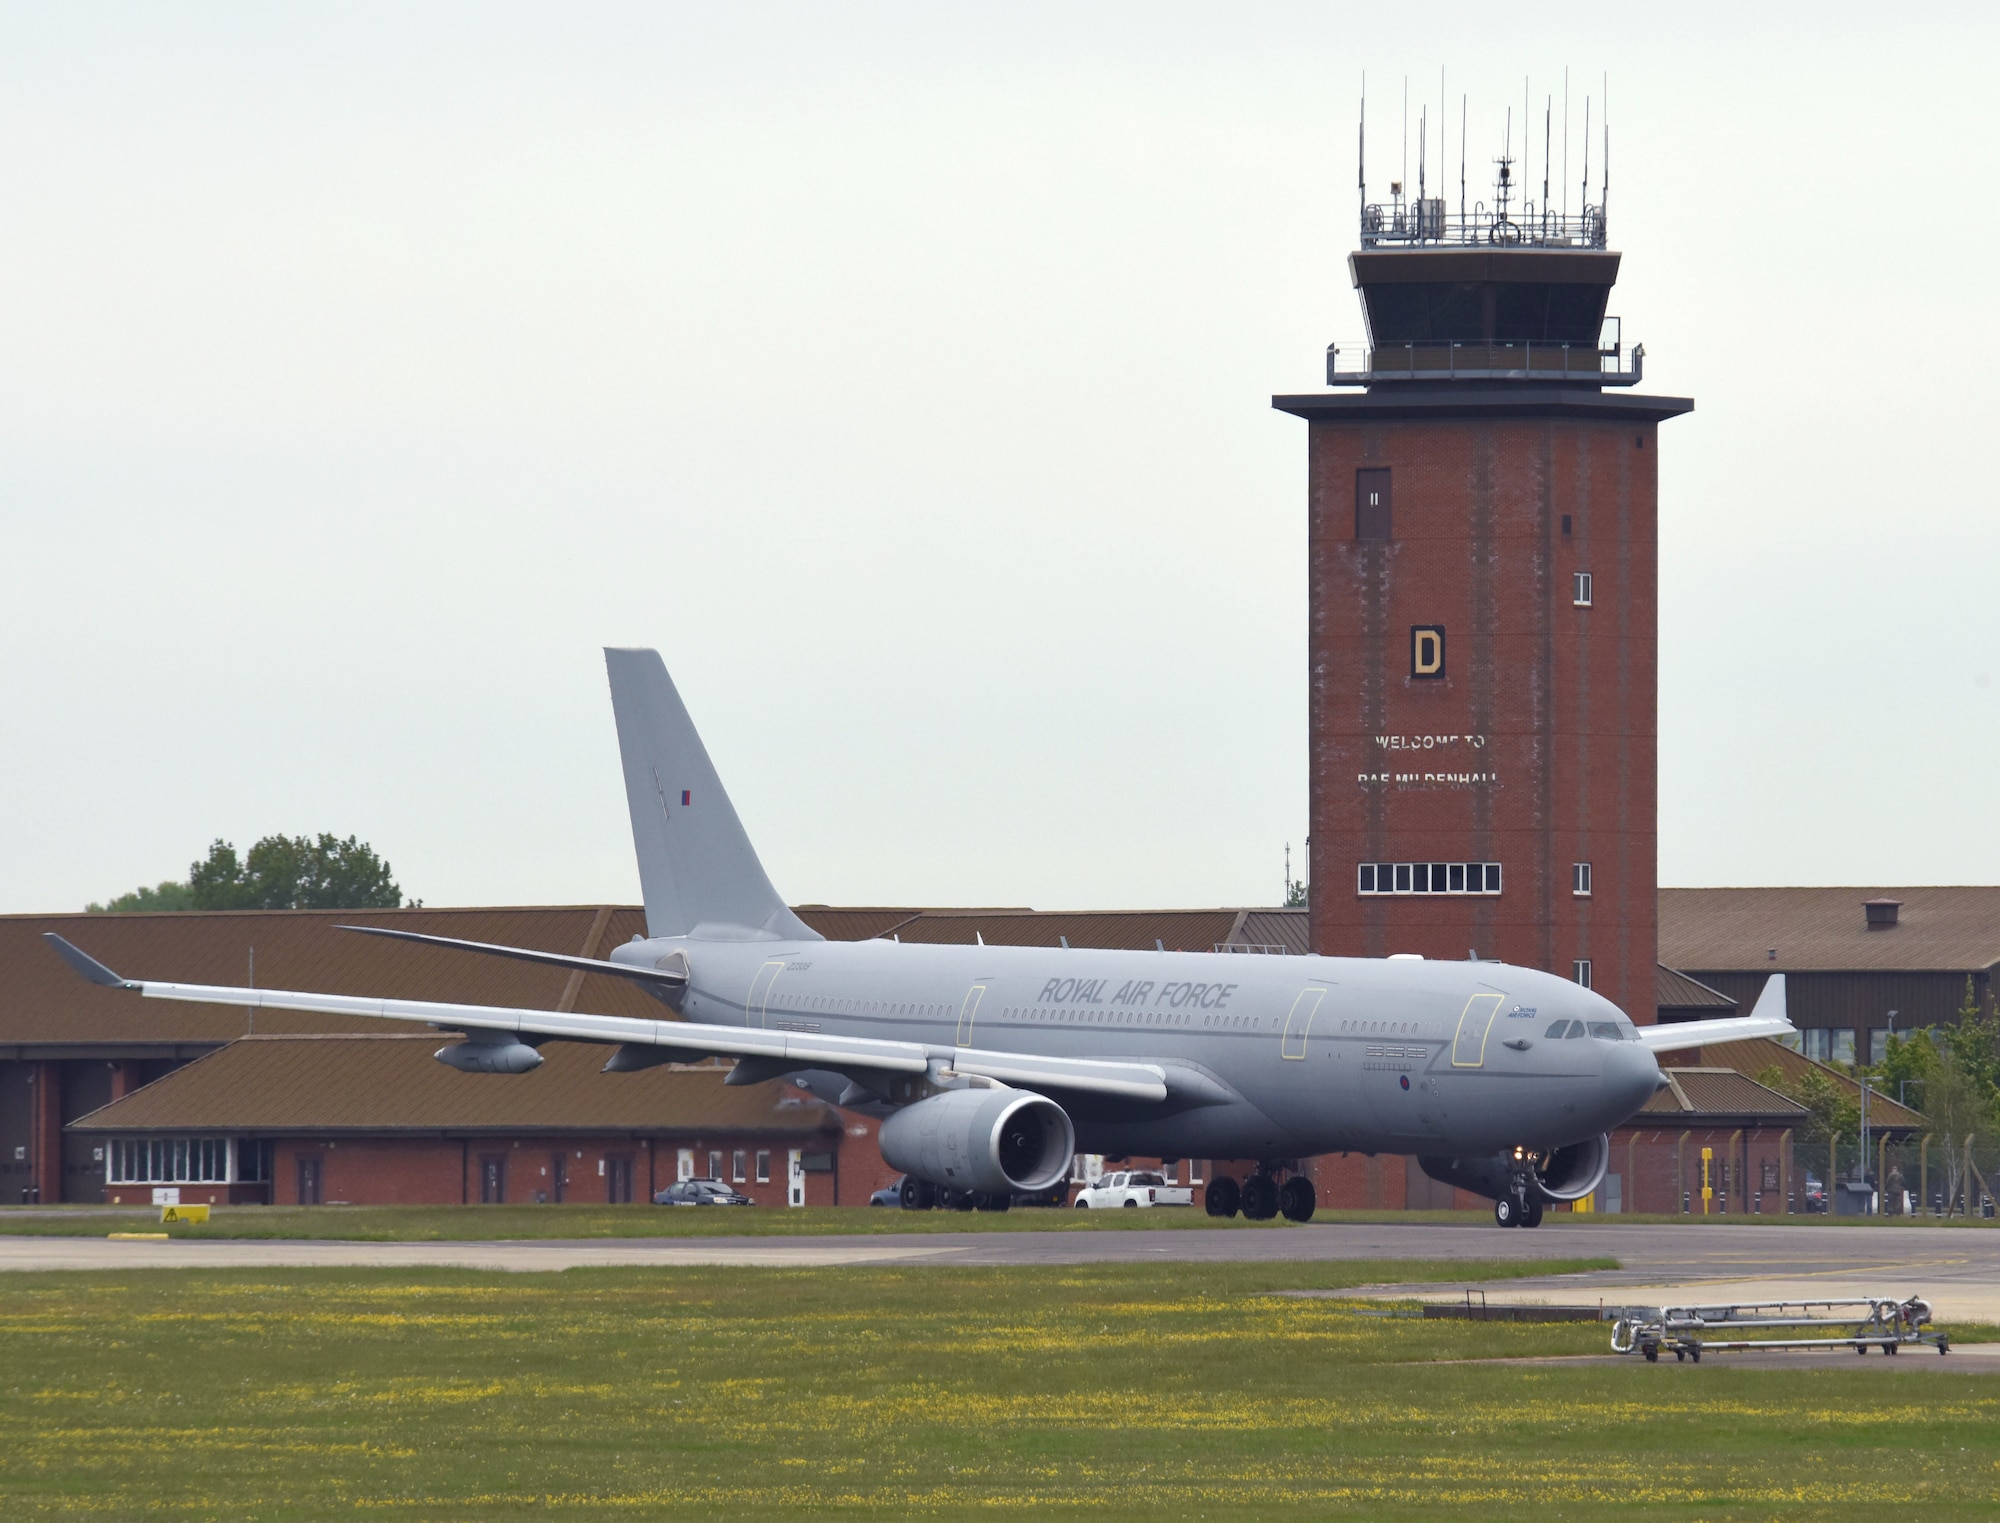 A Royal Air Force A330 Voyager from RAF Brize Norton, England, taxis past the air traffic control tower as it prepares to take off May 20, 2021, at RAF Mildenhall, England. The Voyager took part in an elephant walk and formation flight as part of the European Tanker Symposium which brings tanker crew from NATO countries, along with other U.S. and Canadian forces together to share experiences and knowledge. (U.S. Air Force photo by Karen Abeyasekere)